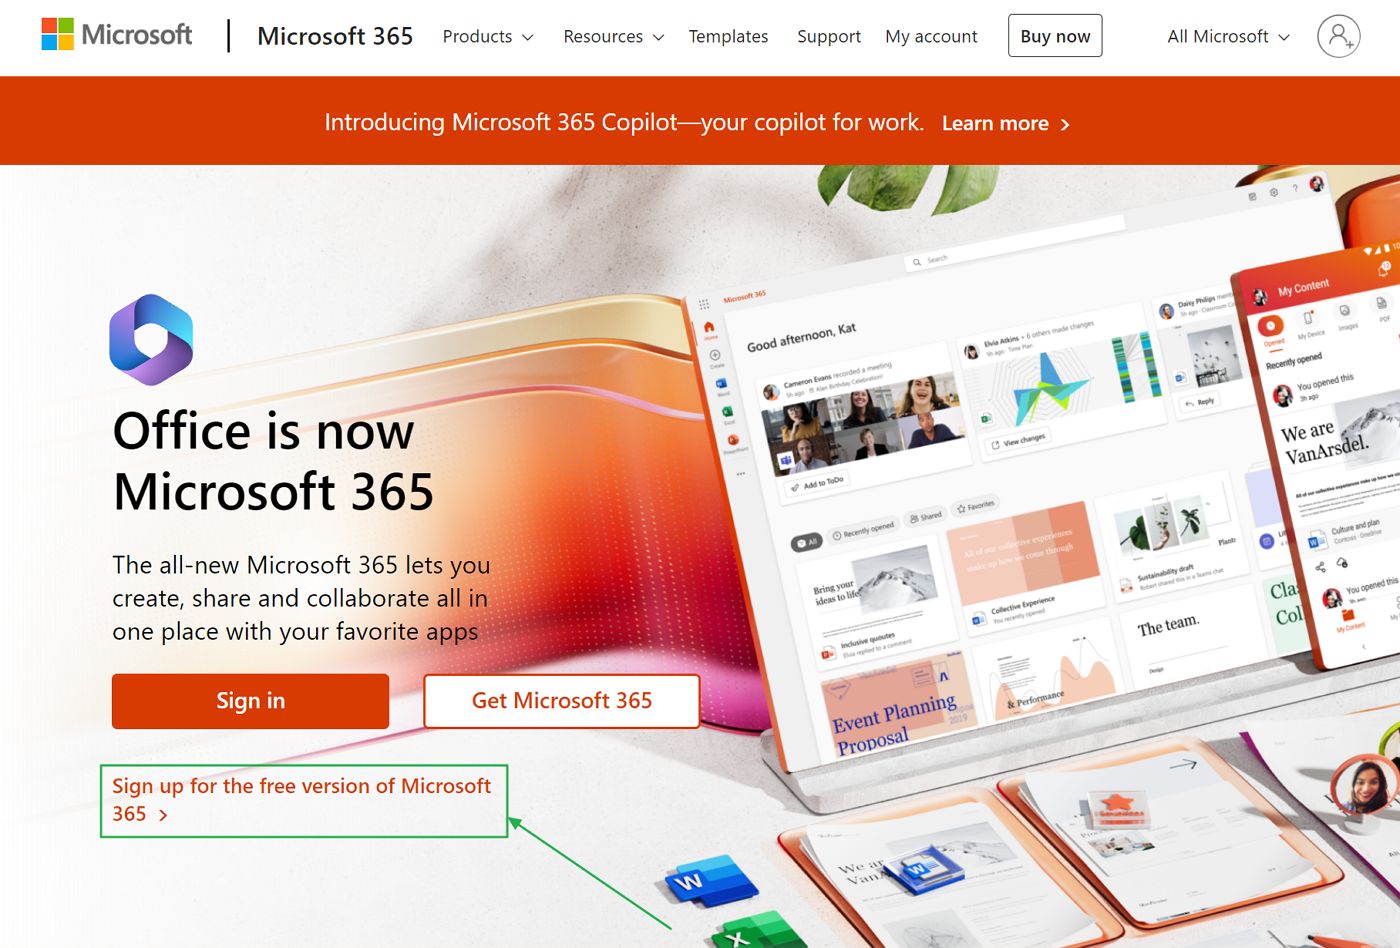 sign up for the free version of microsoft 365